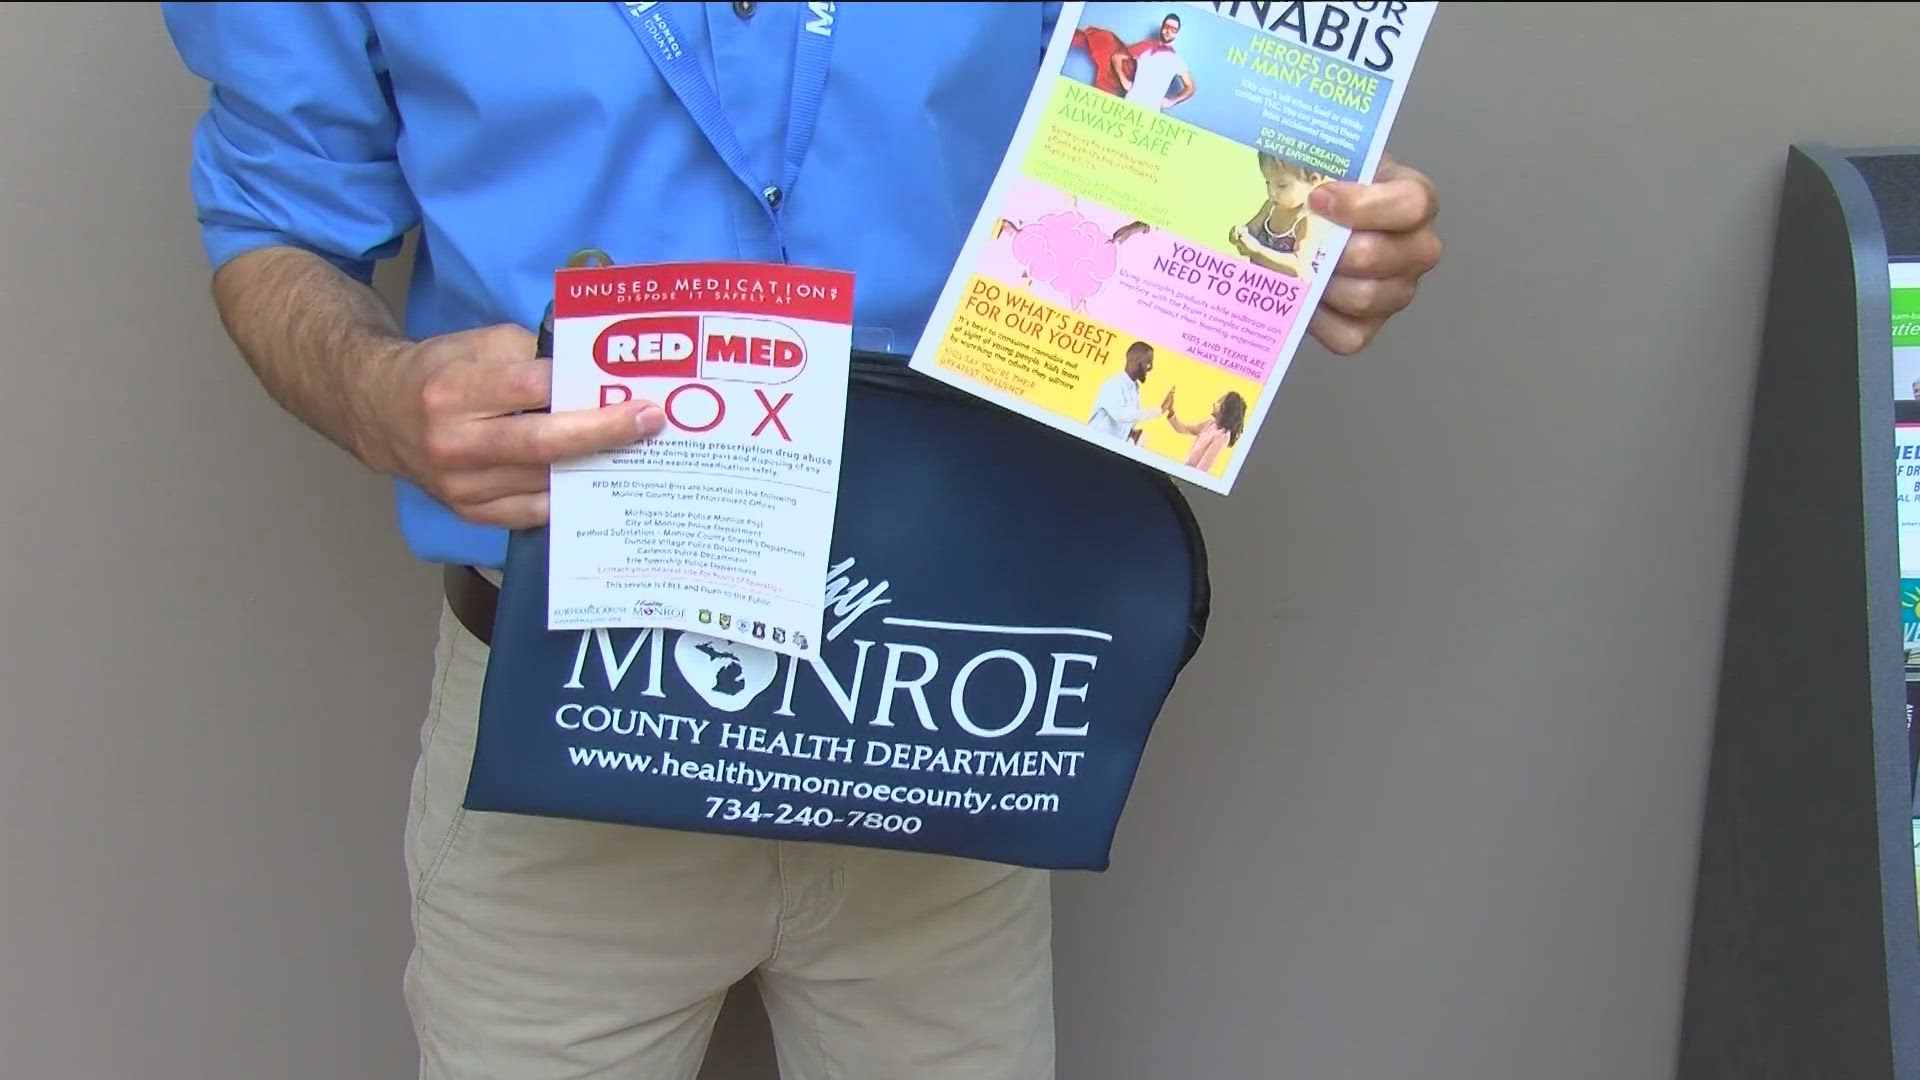 Monroe County Public Safety Director Chad Tolstedt says adults simply being safer, starting with using locked bags could keep kids out of harm and out of hospitals.